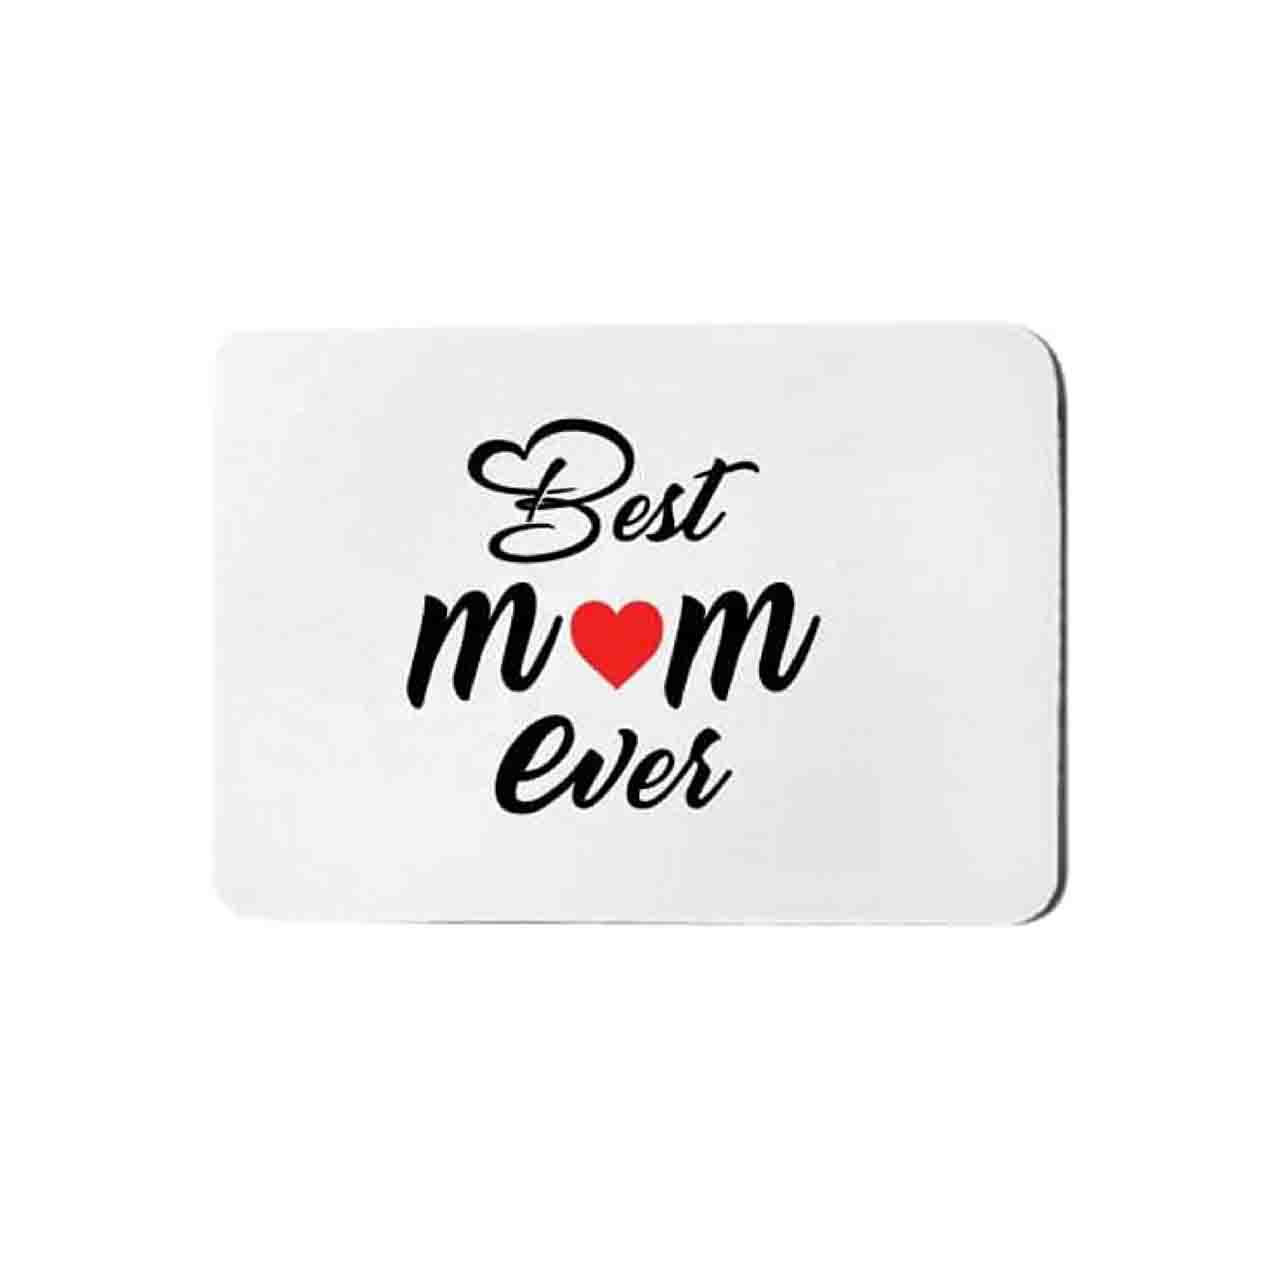 mouse pad customize mouse pad mouse pad for mom mother day gift mother day mouse pad gift